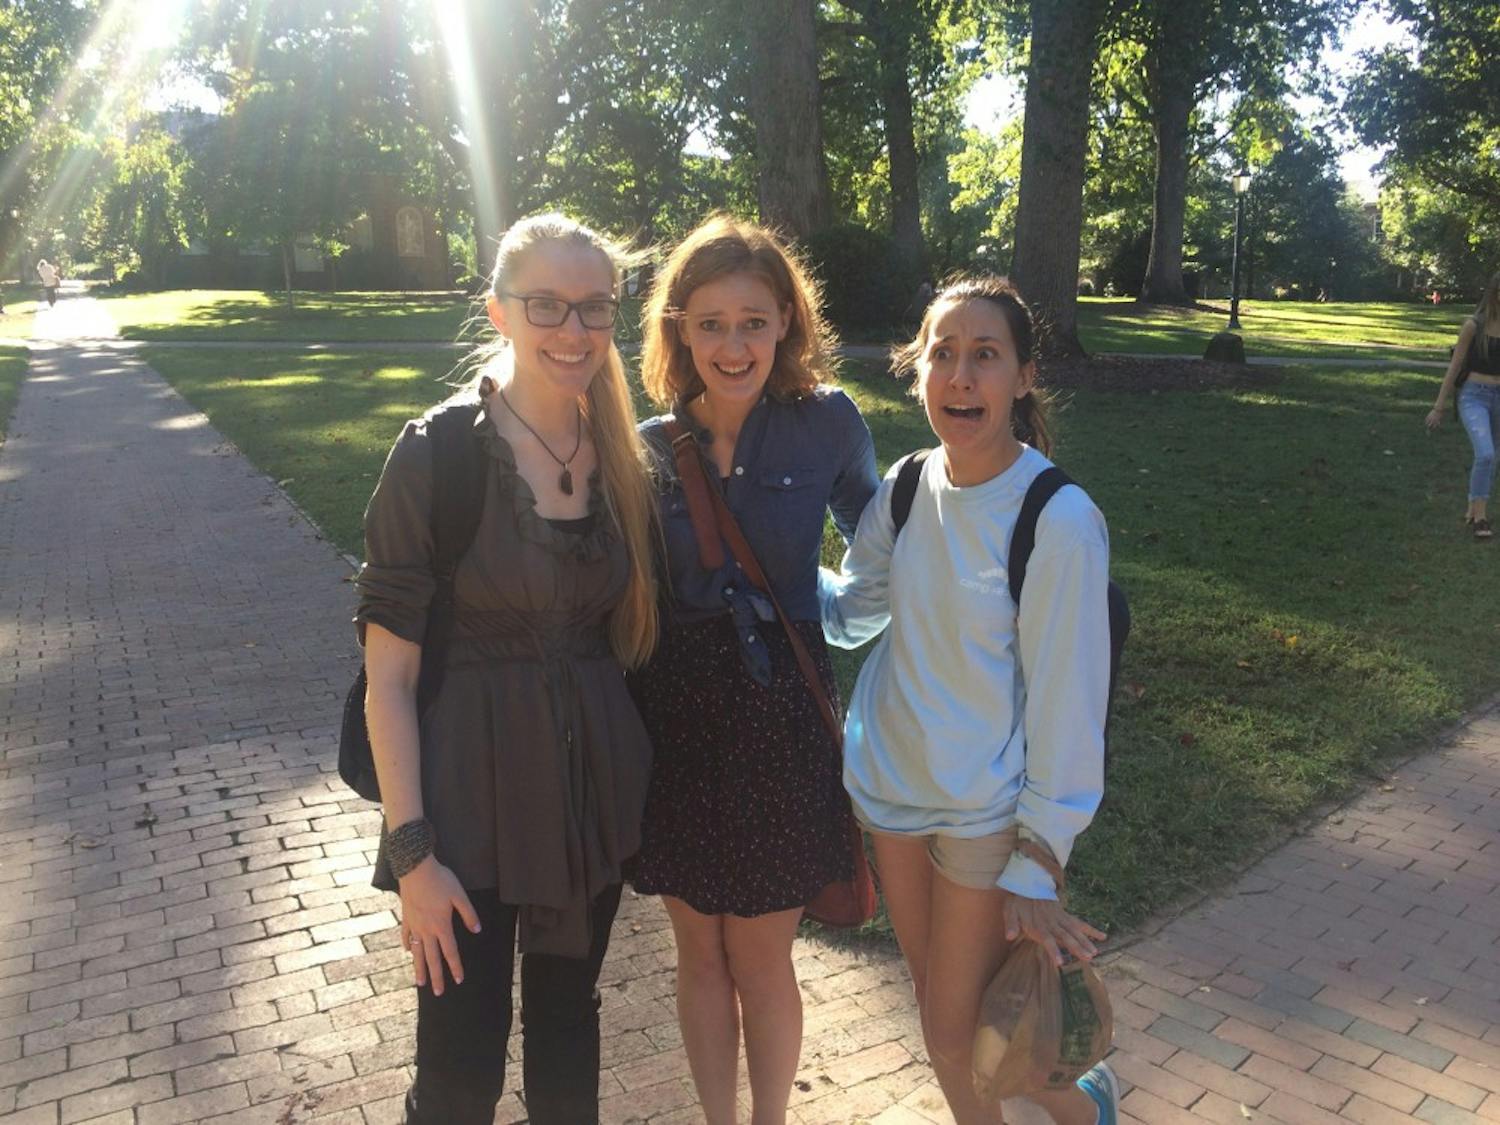 First-year law students (from left to right) Miranda Goot, Mackenzie Harmon and Haven Clark